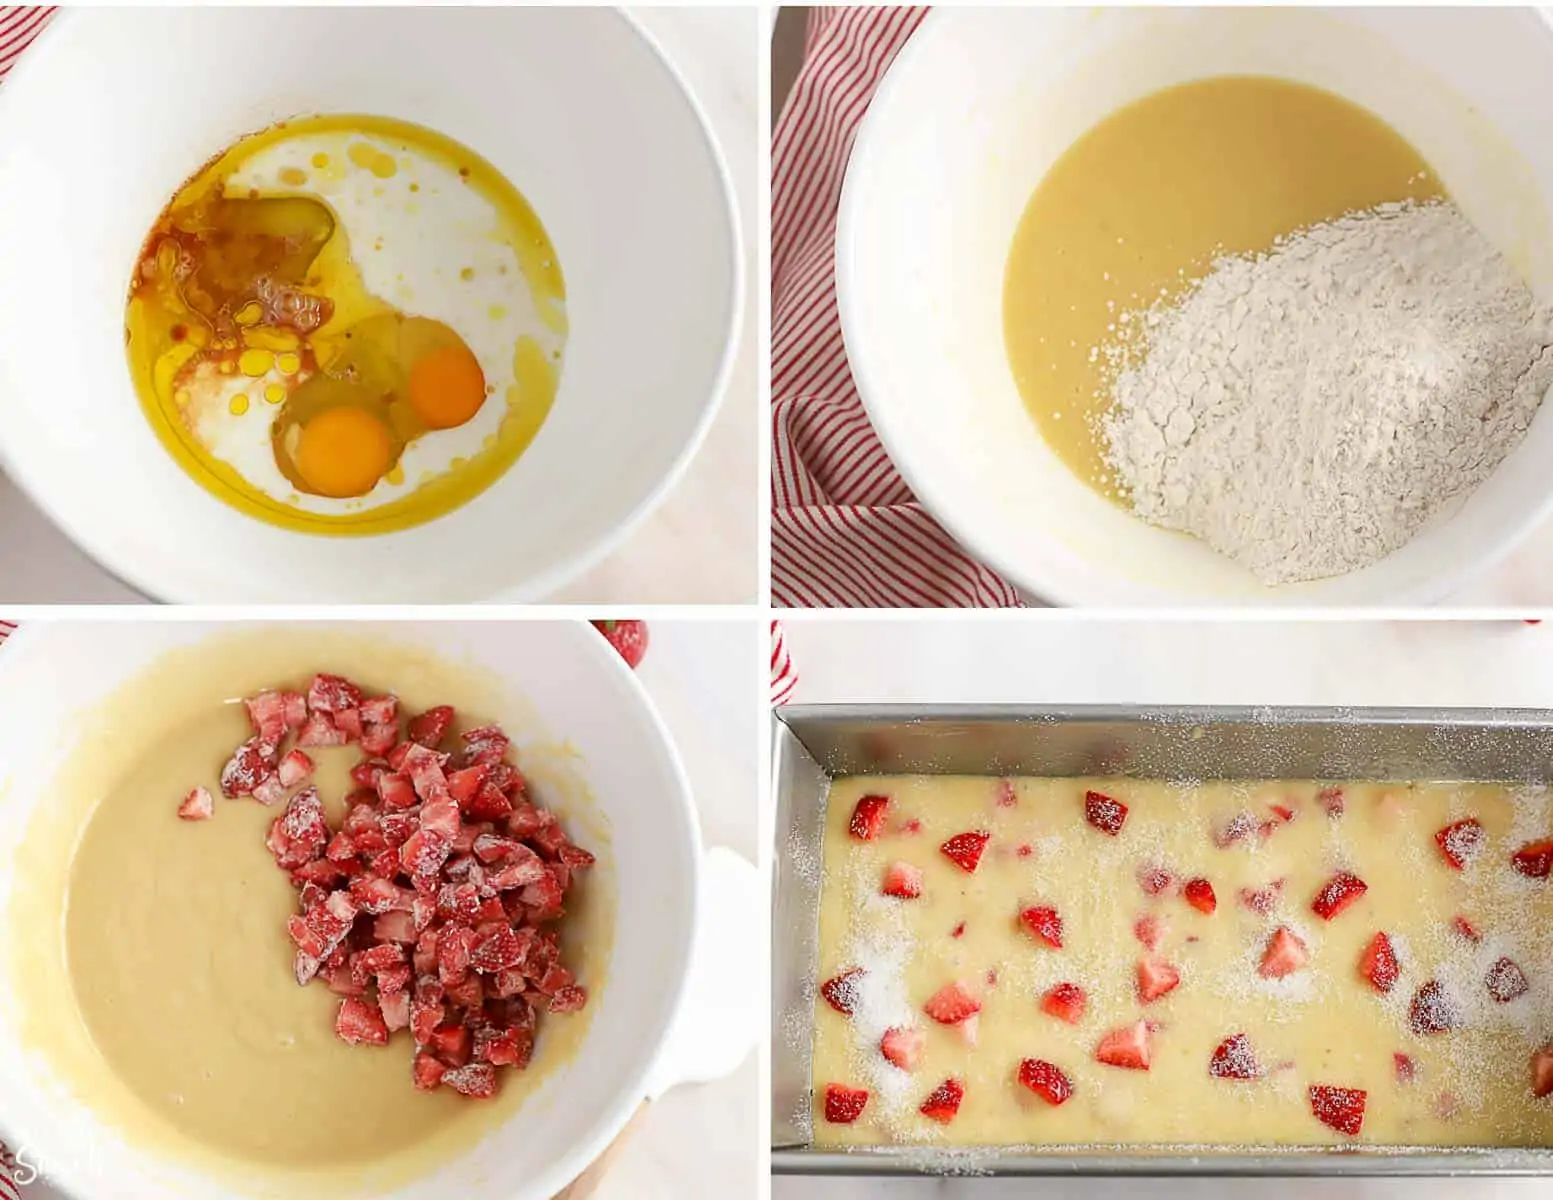 Batter for strawberry bread in a large white bowl and in a metal loaf pan.